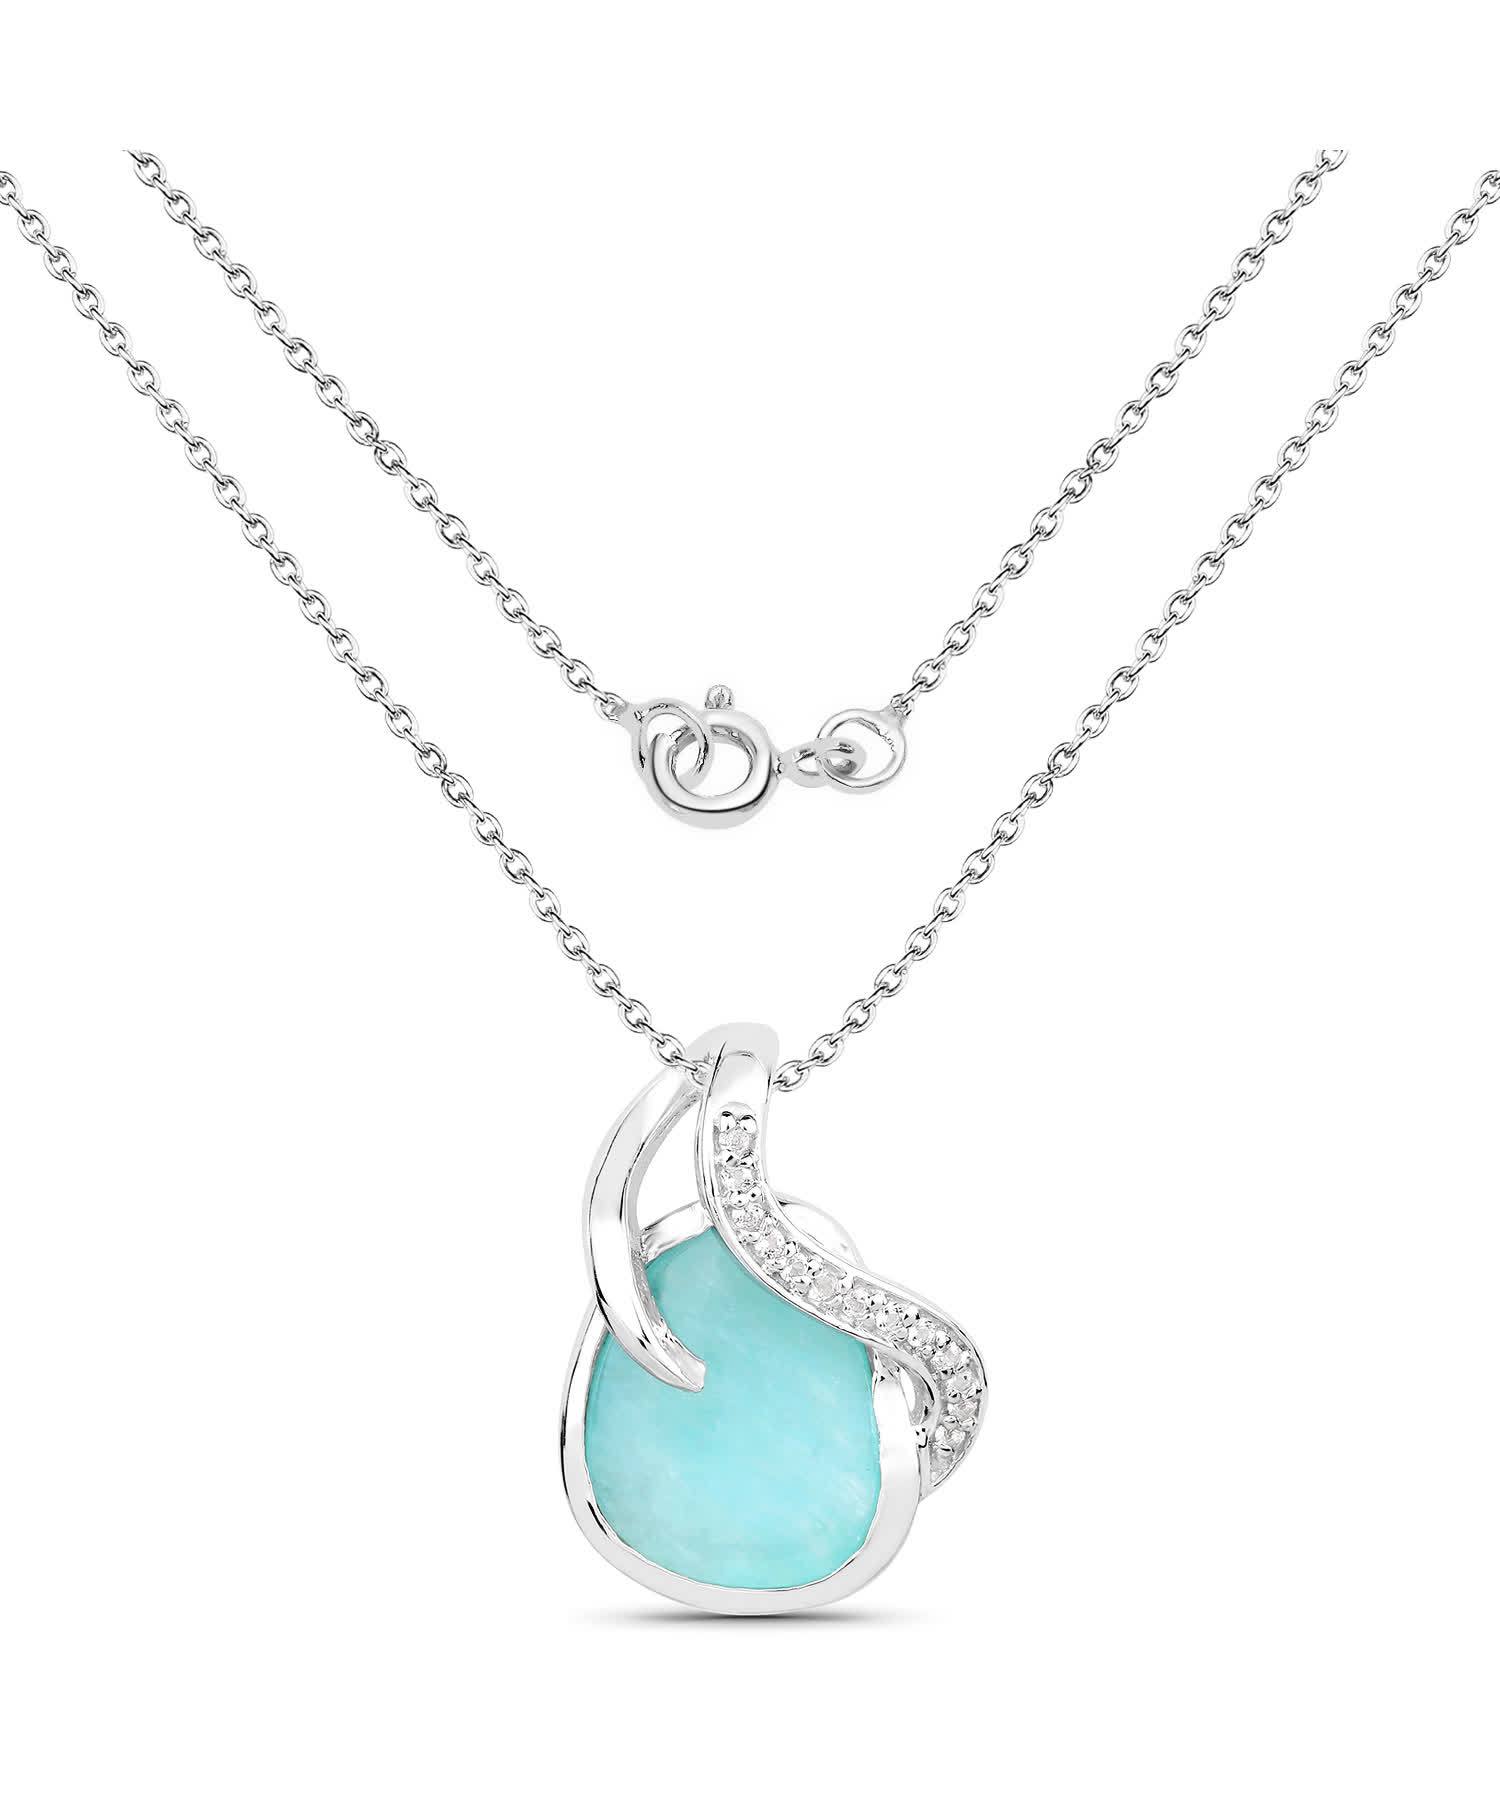 2.58ctw Natural Amazonite and White Topaz Rhodium Plated 925 Sterling Silver Pendant With Chain View 2